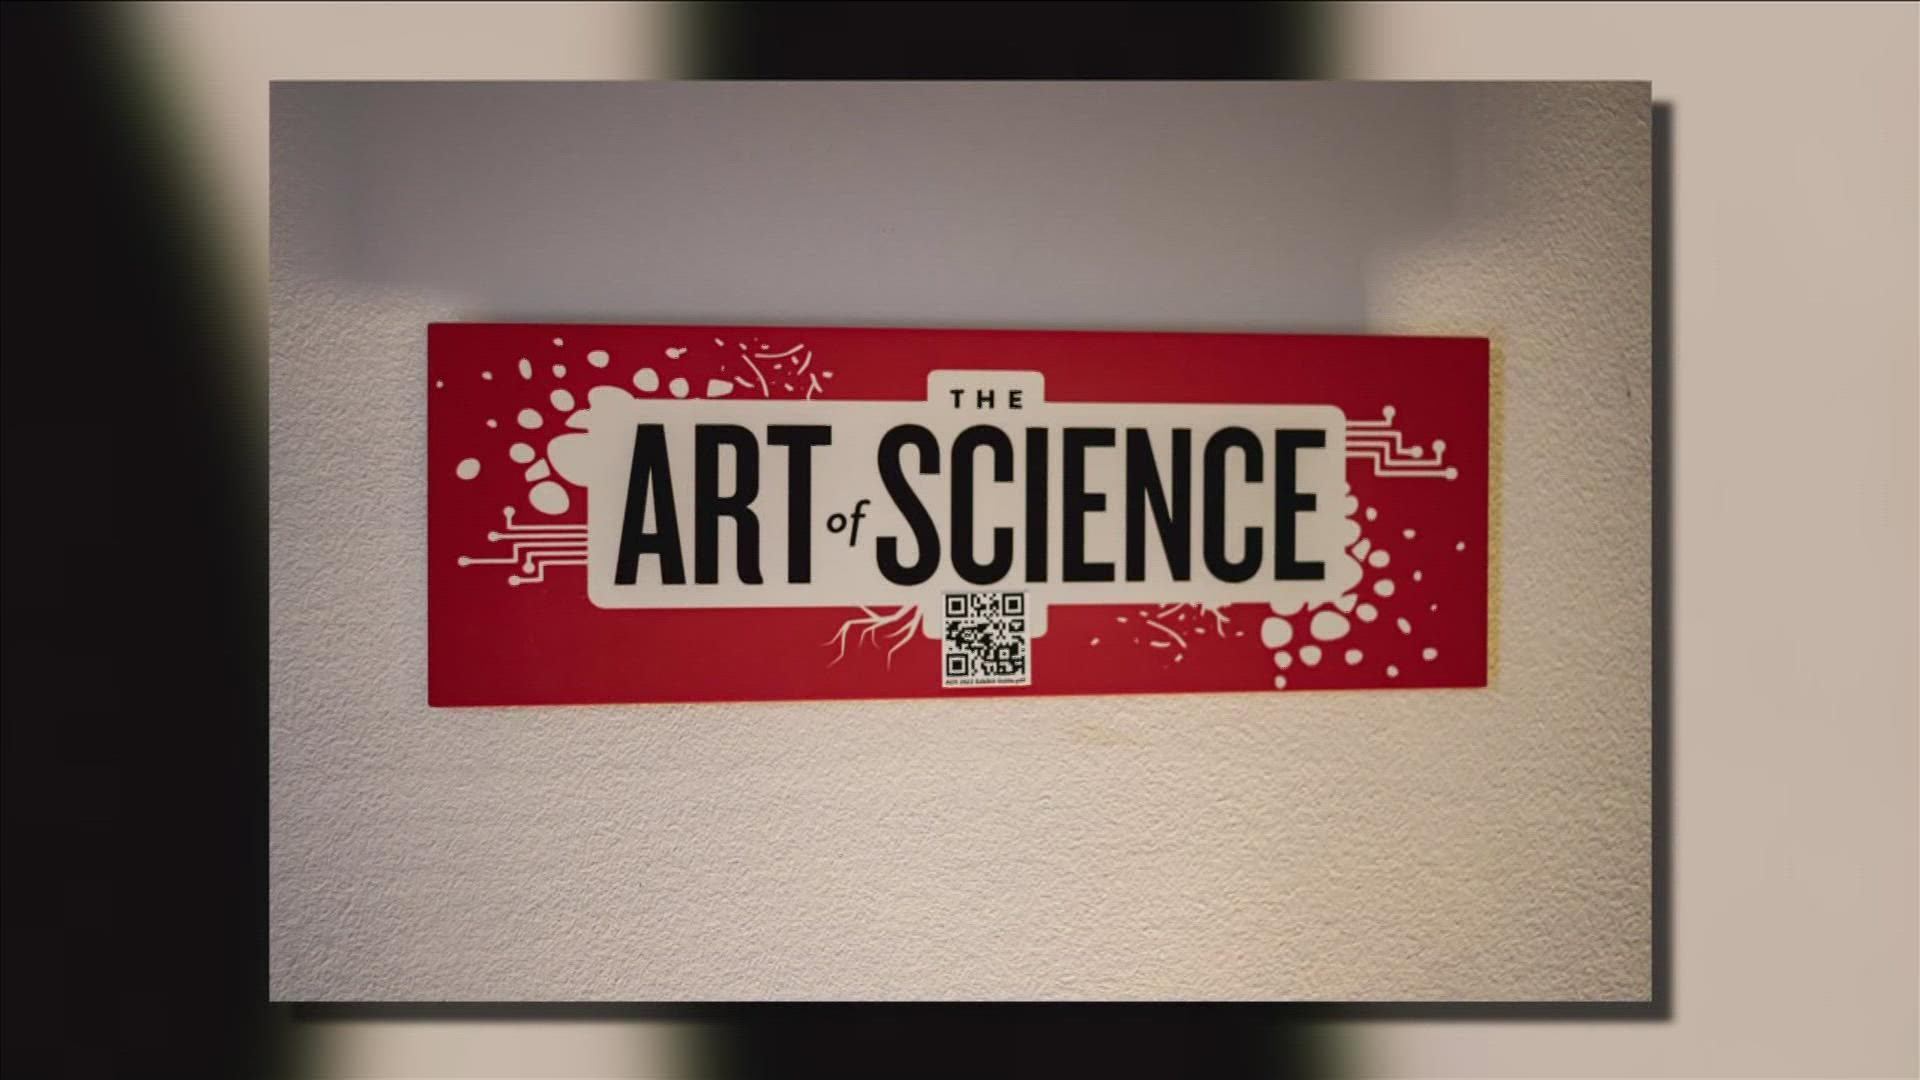 Local artists have teamed up with medical research scientists and clinicians across Memphis. Together, they are introducing audiences to science that is saving lives